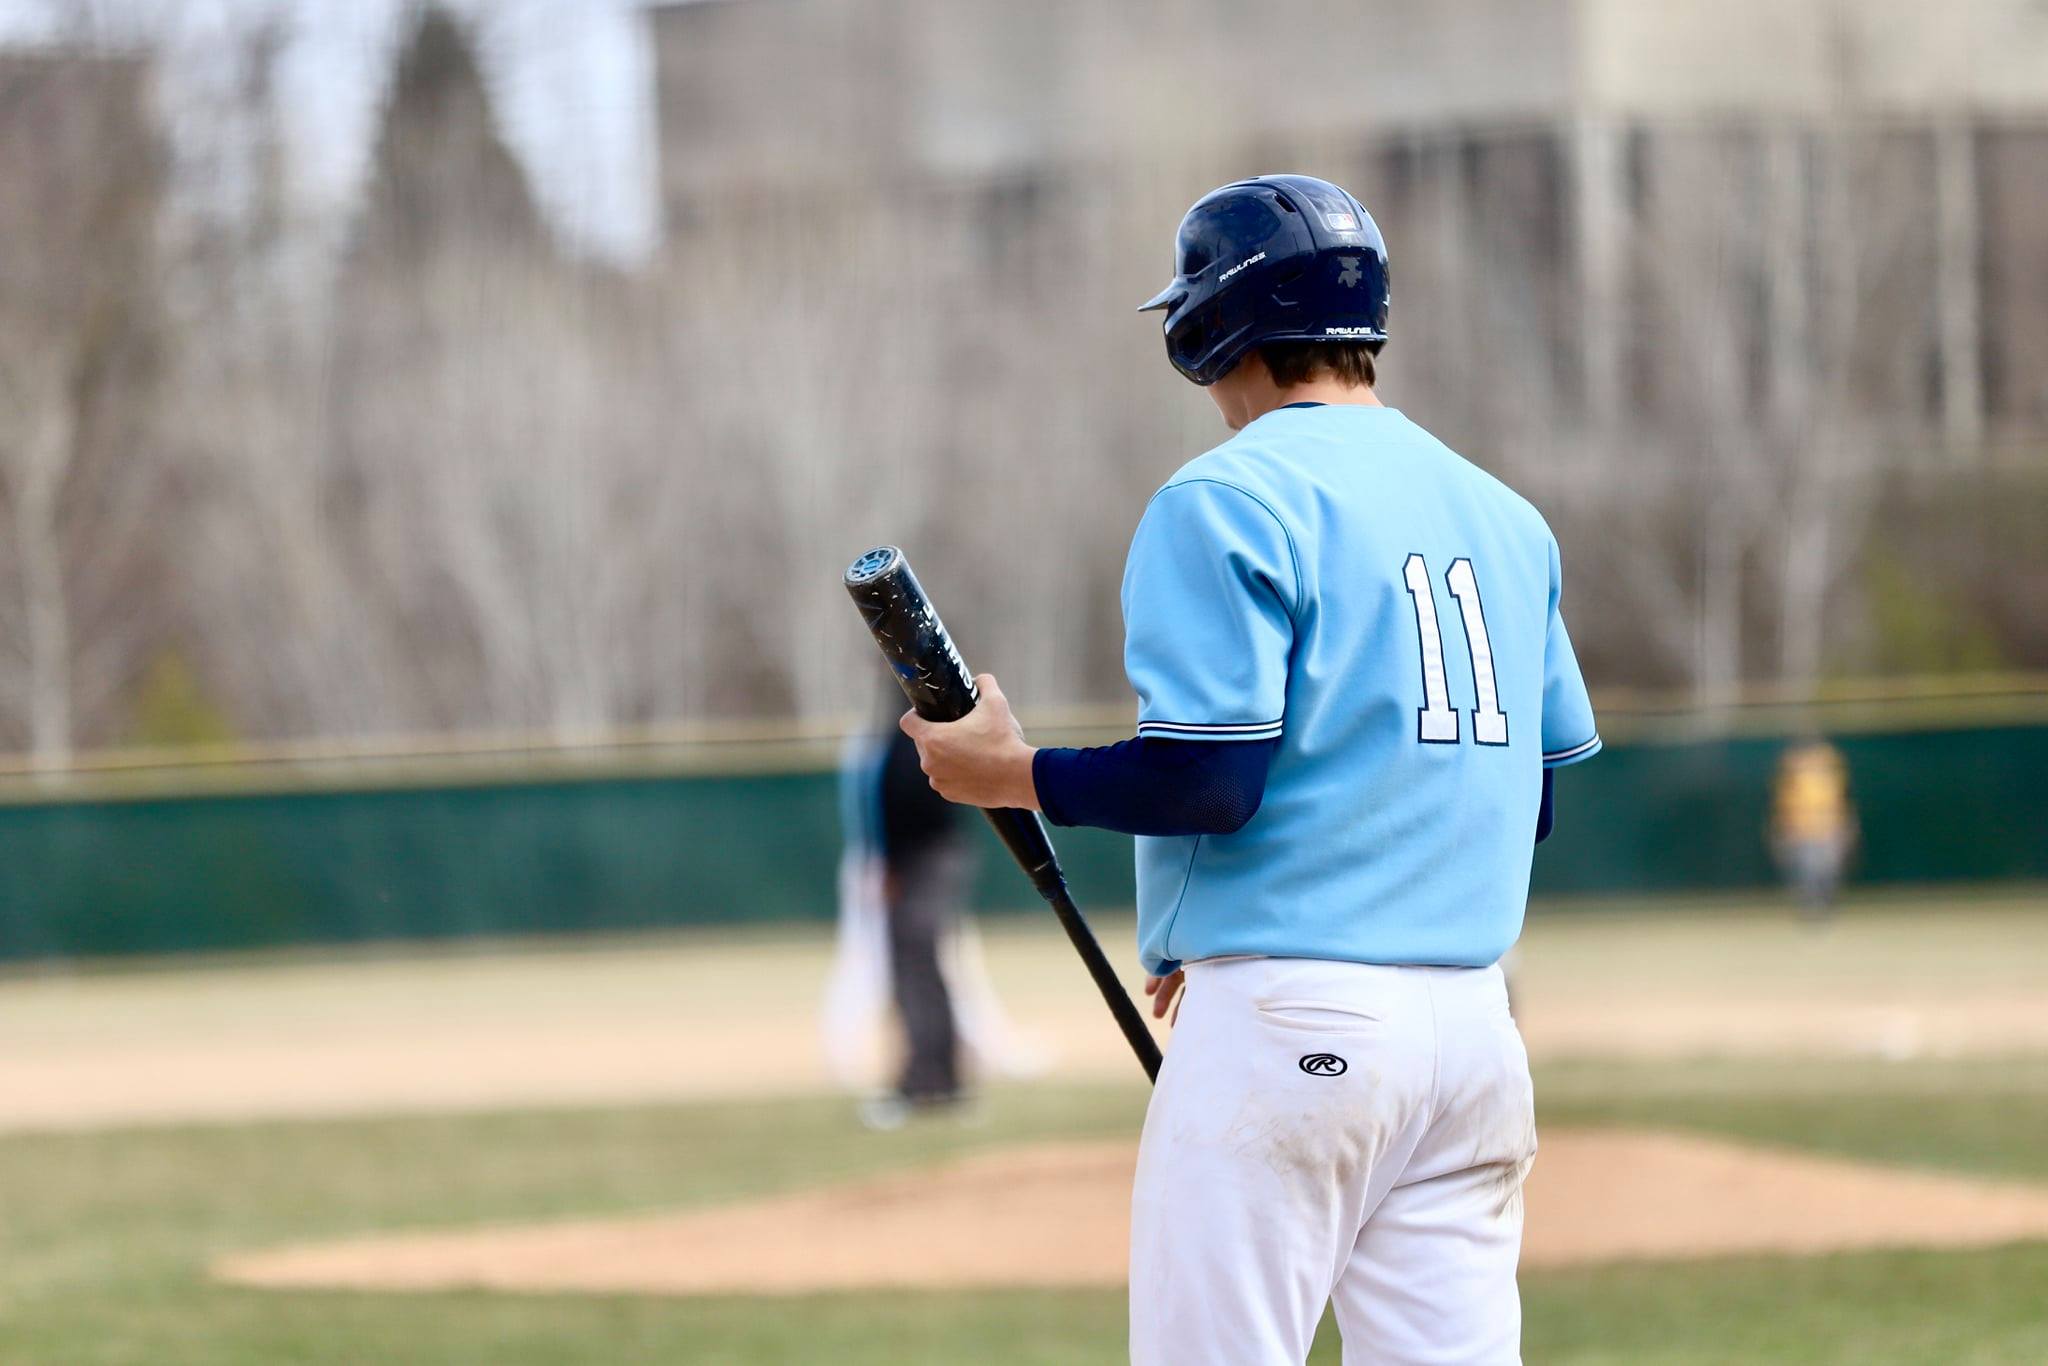 Dominating win, walk-off for Tritons